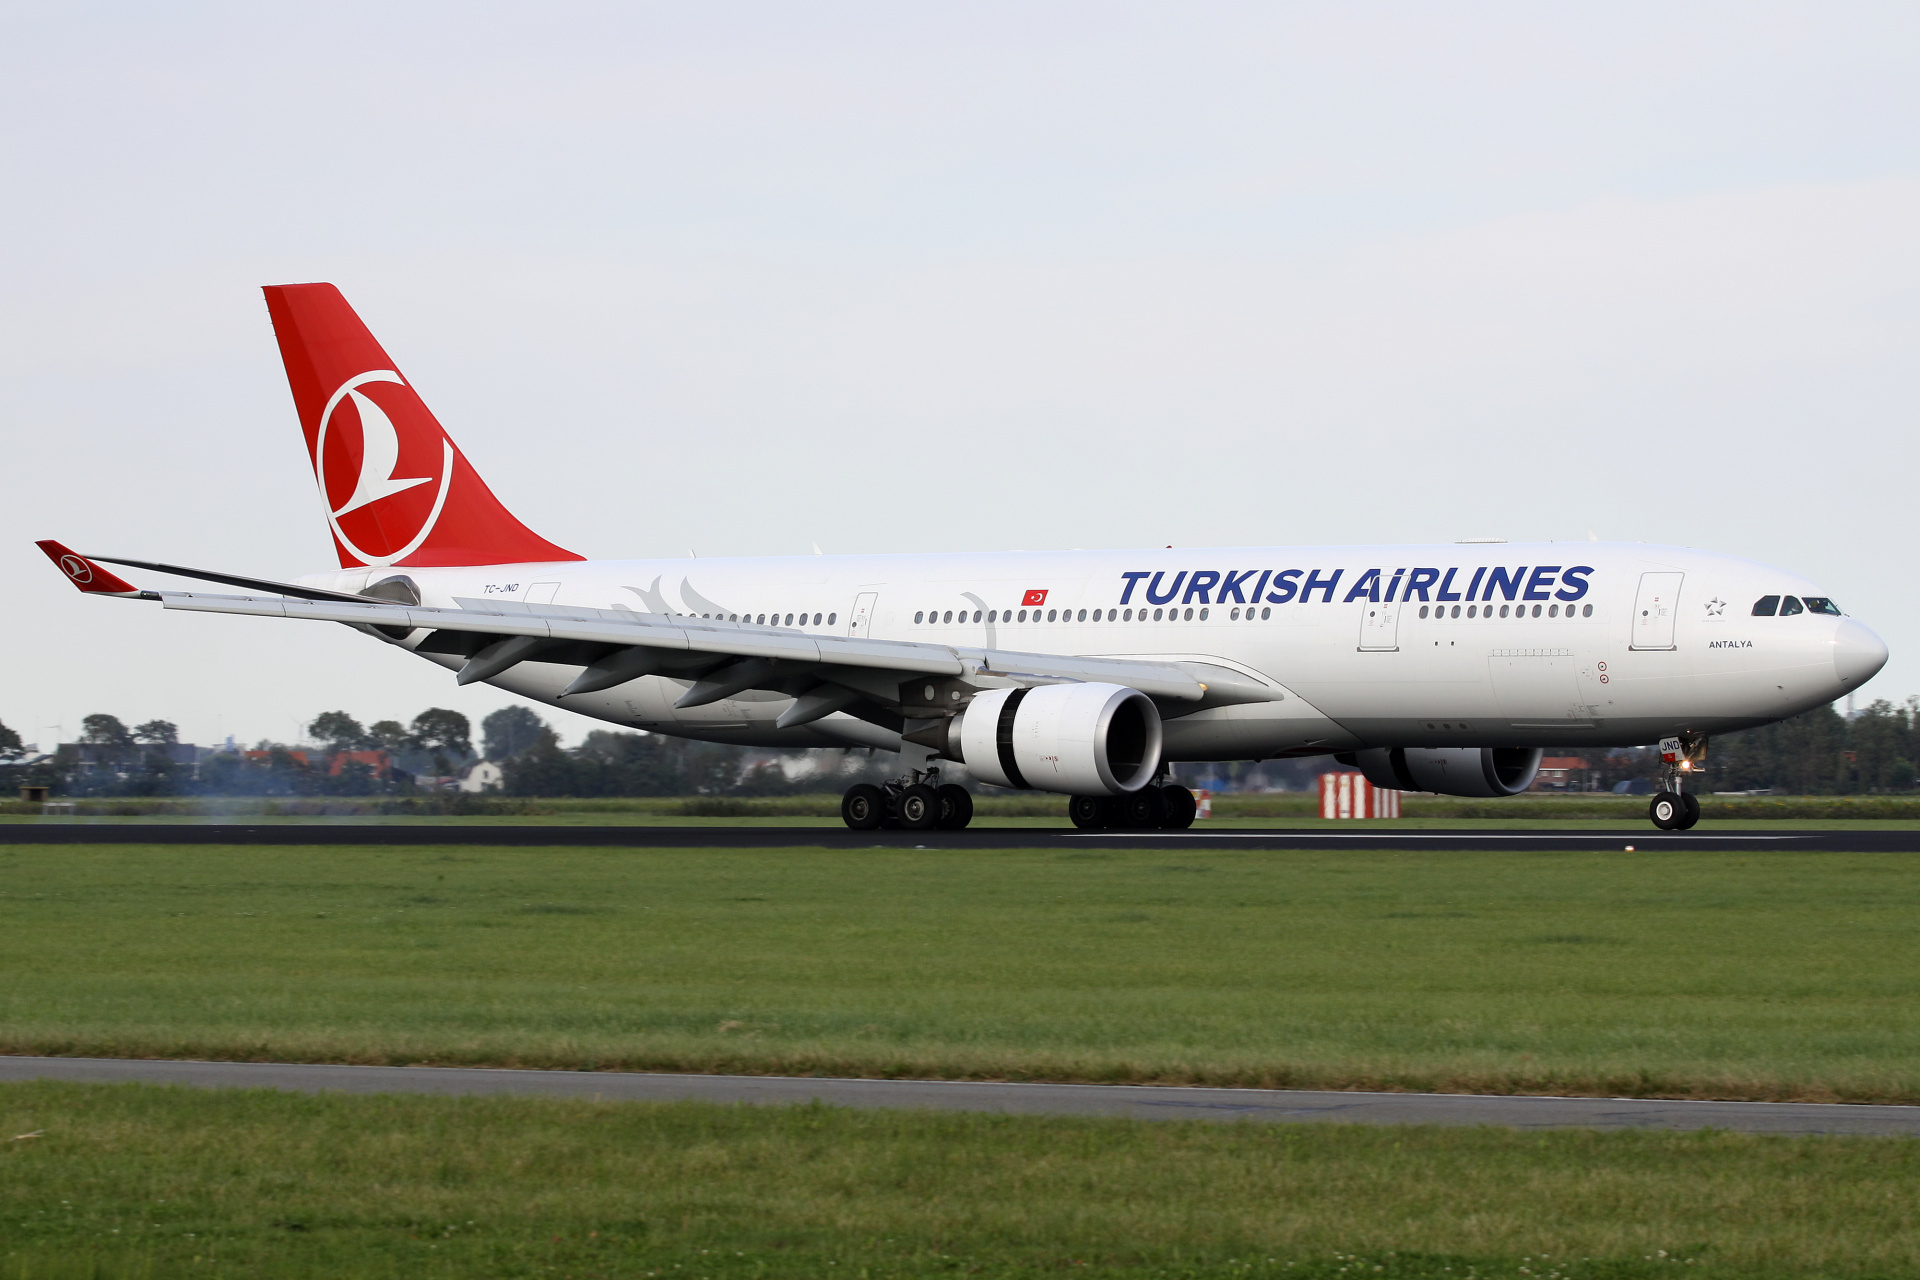 TC-JND (Aircraft » Schiphol Spotting » Airbus A330-200 » THY Turkish Airlines)